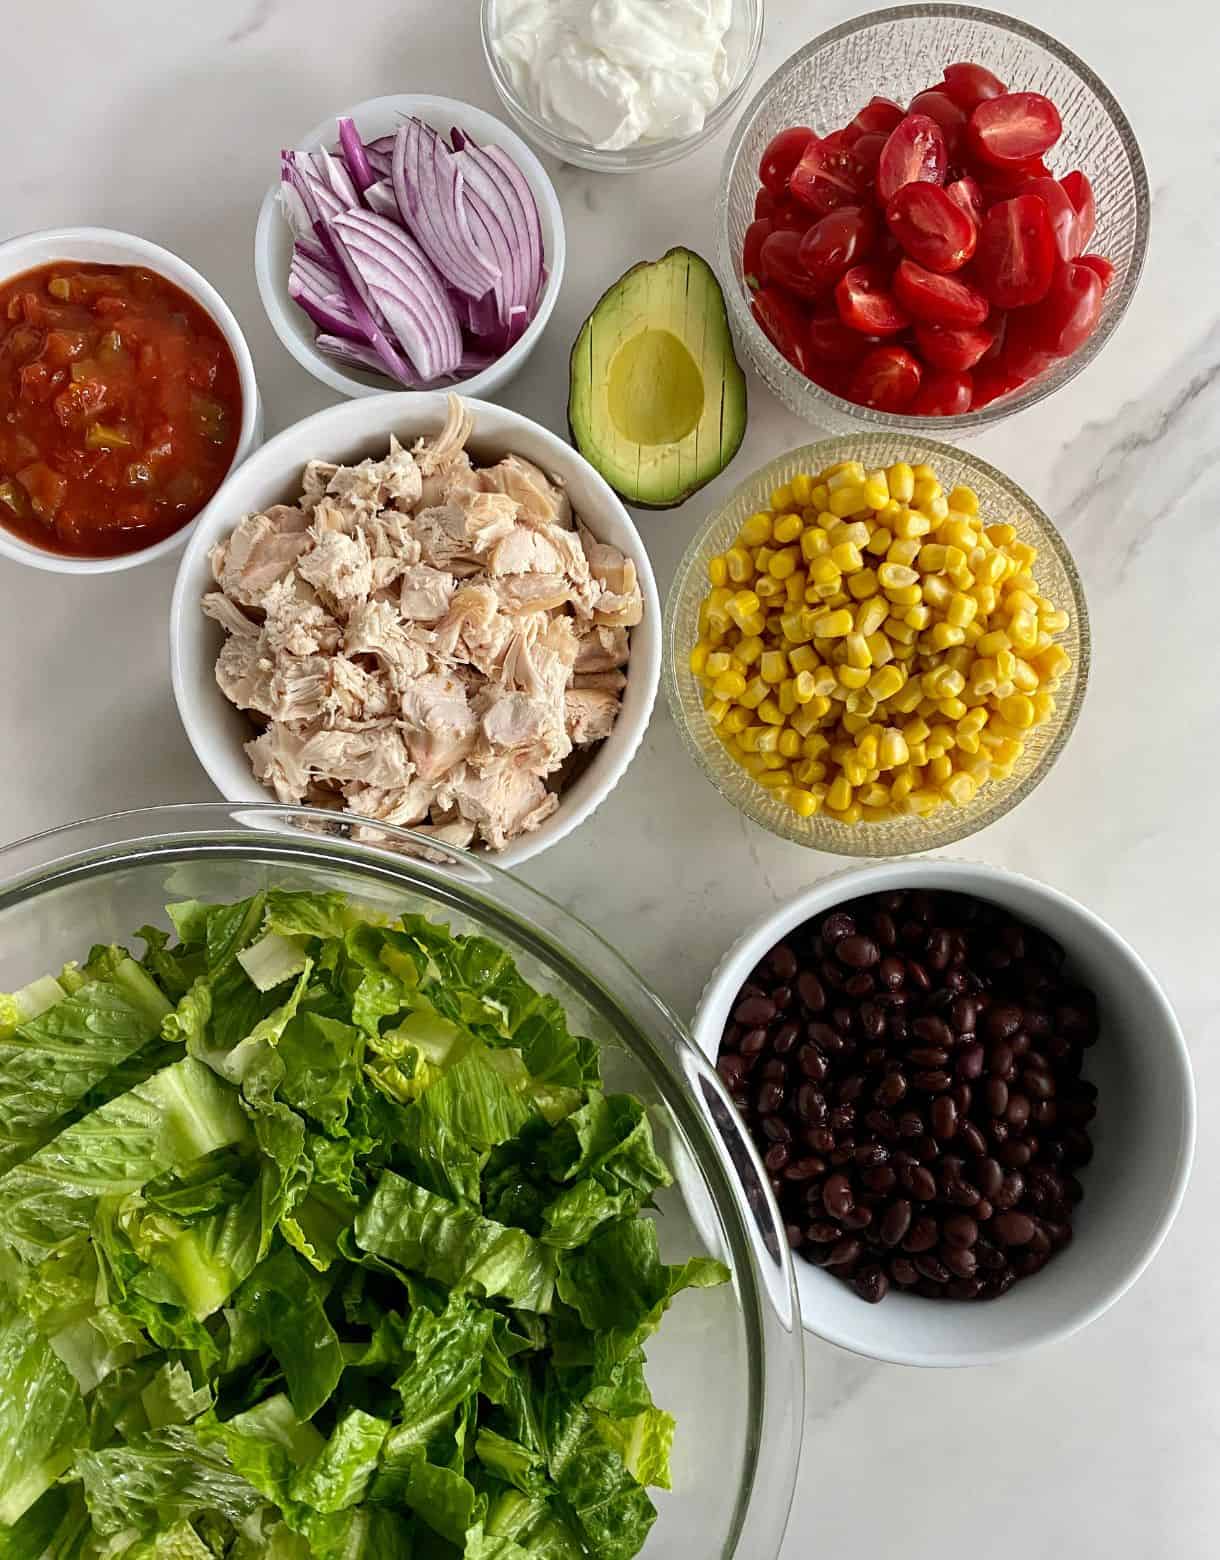 Sliced romaine lettuce, black beans, corn, chopped cooked chicken, salsa, sour cream, sliced avocado, halved grape tomatoes and sliced red onion.